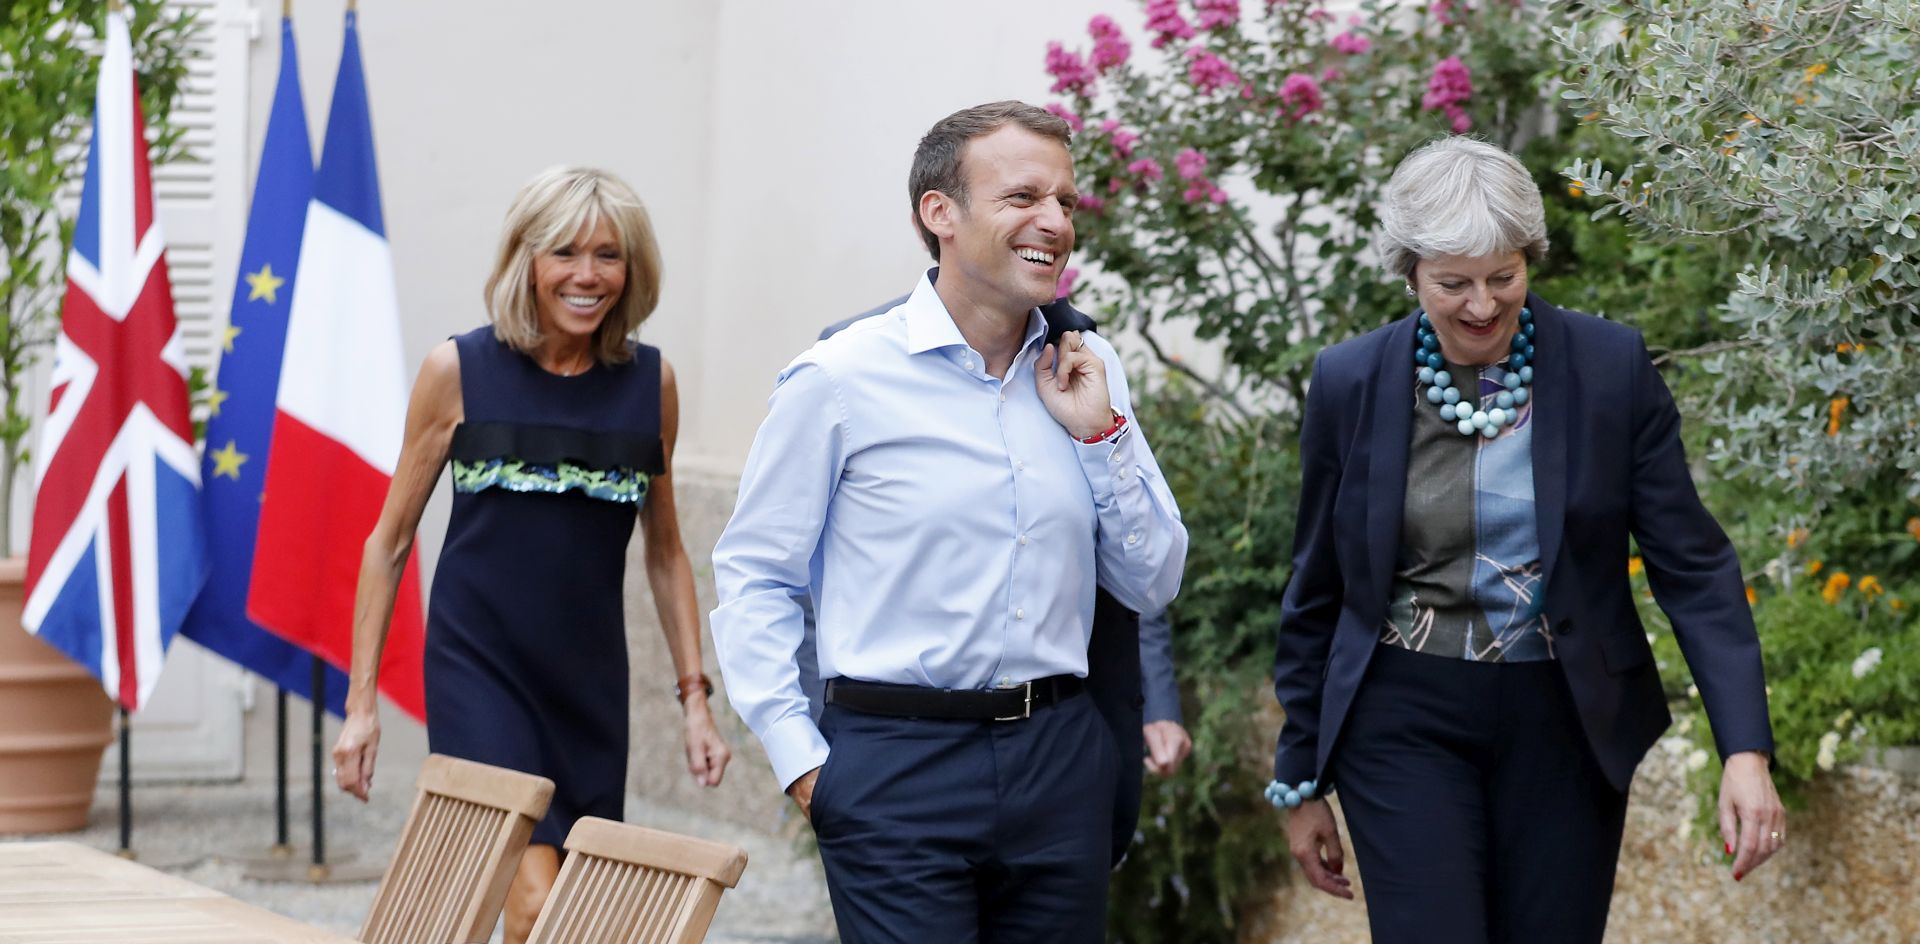 epa06925983 French President Emmanuel Macron (C) and French First Lady Brigitte Macron (L) walk with British Prime Minister Theresa May (R) and her husband Philip May (unseen) prior their dinner at the Fort de Bregancon in Bornes-les-Mimosas, southern France, 03 August 2018. May cut her holiday for this meeting at the French presidential summer retreat.  EPA/SEBASTIEN NOGIER / POOL MAXPPP OUT